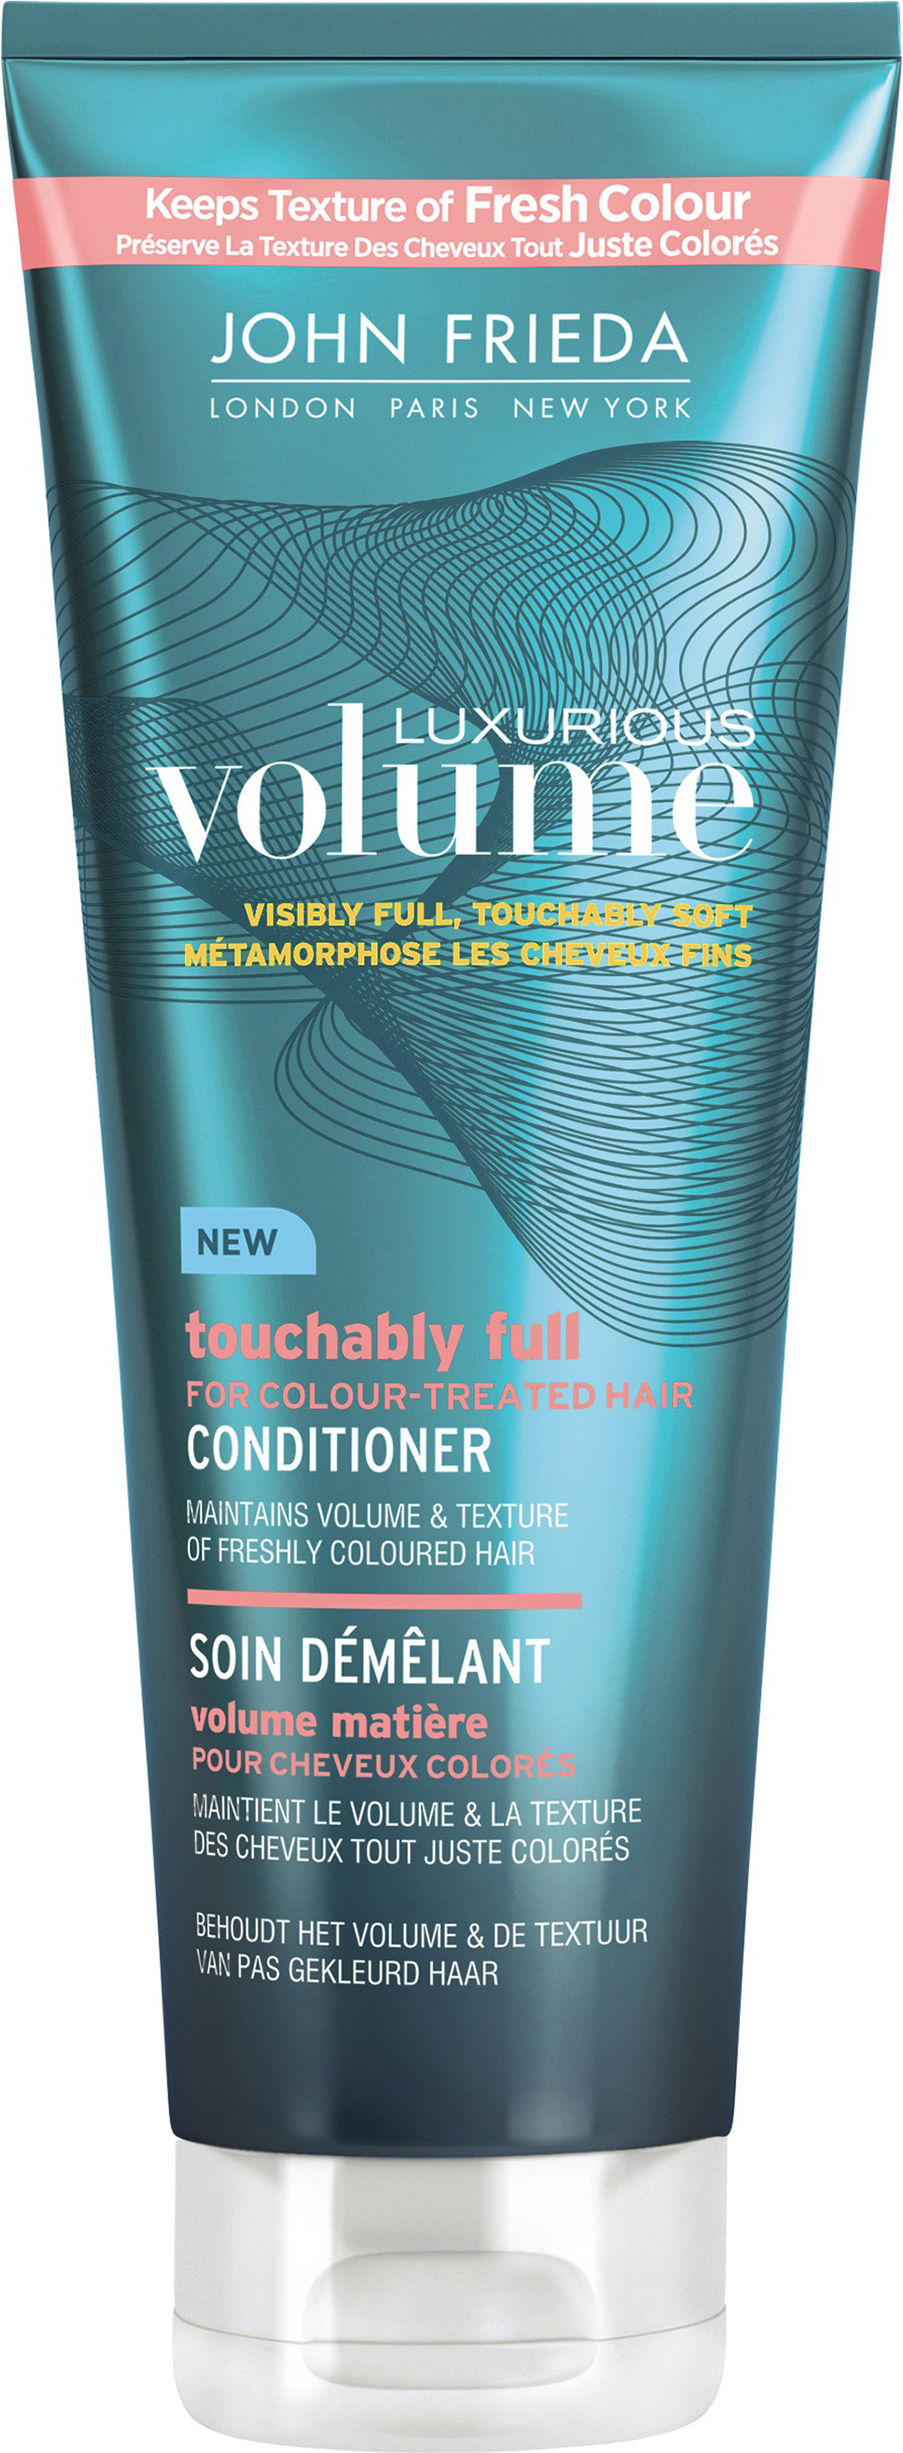 John Frieda Luxurious Volume Touchably Full Colour Treated Conditioner